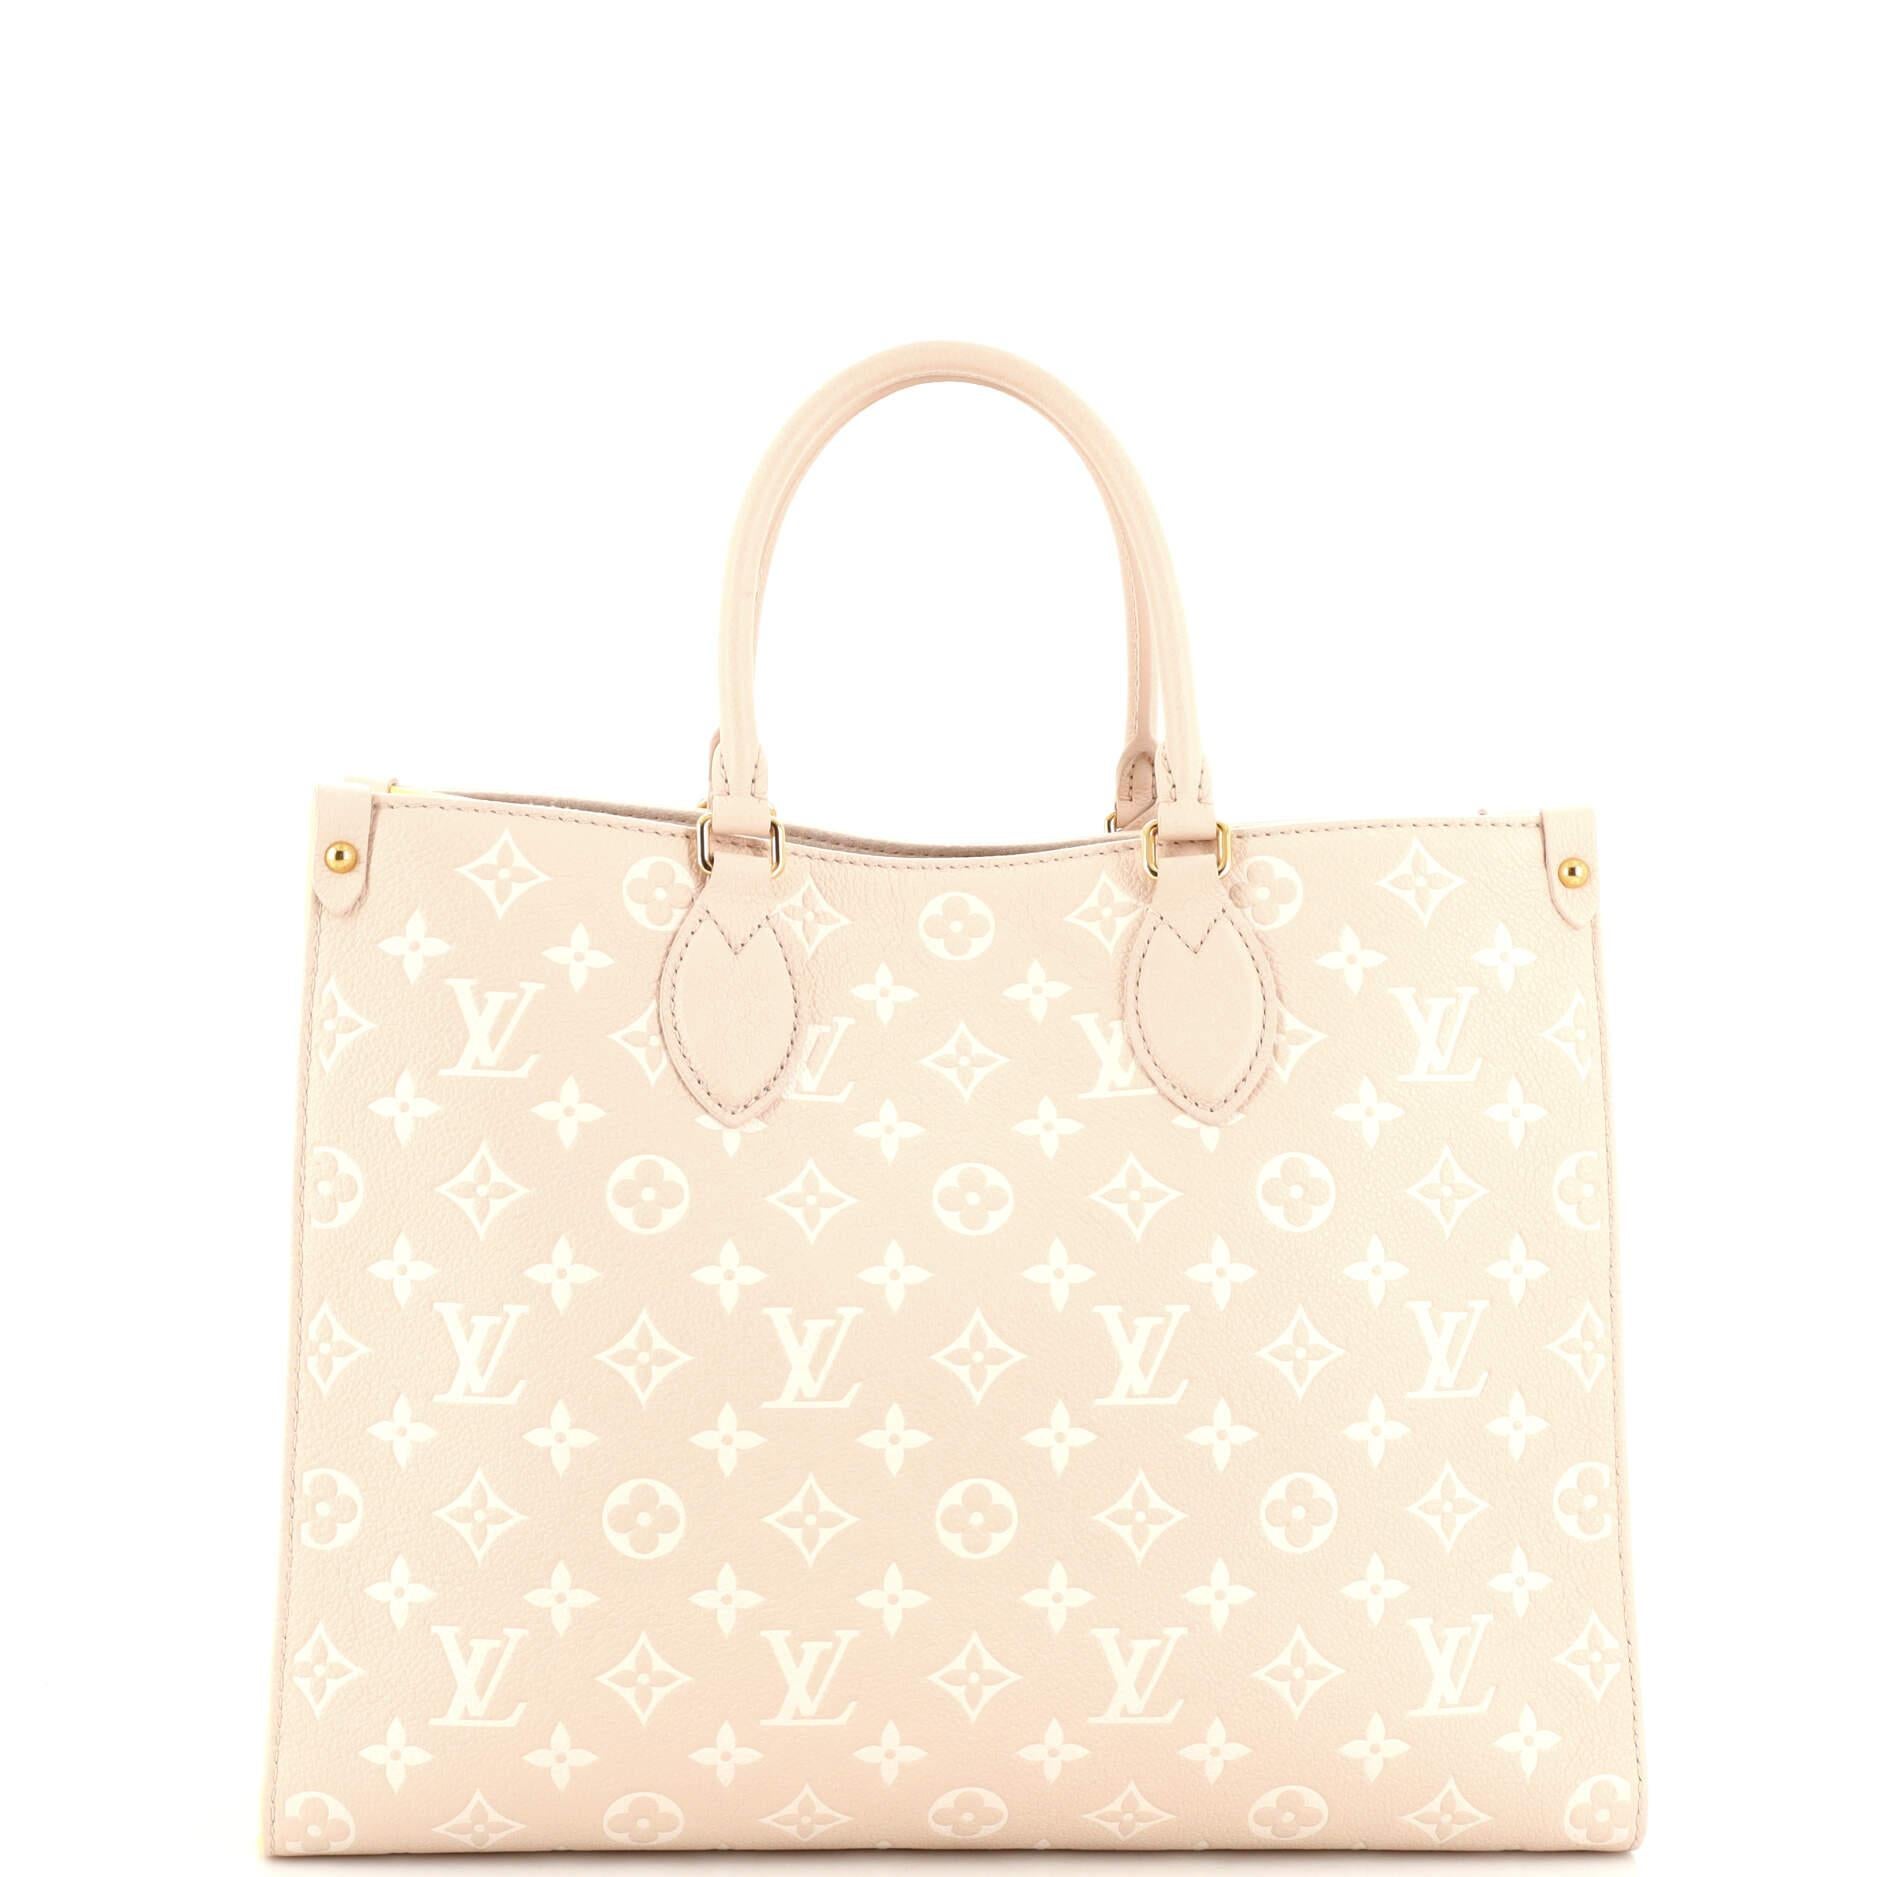 Louis Vuitton OnTheGo Tote Spring in the City Monogram Empreinte Leather MM In Good Condition For Sale In NY, NY